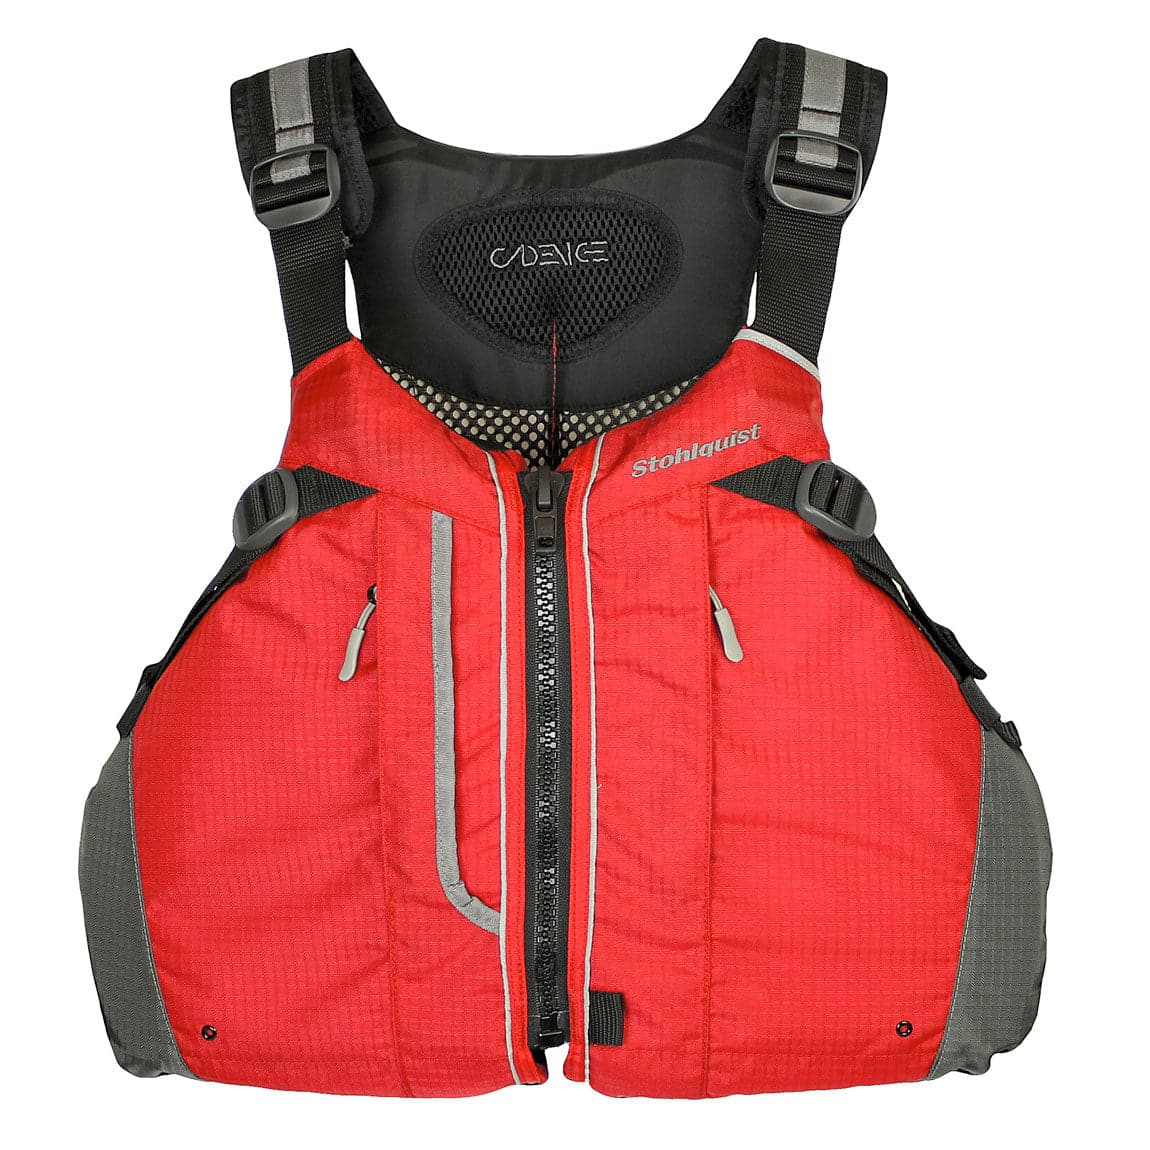 Featuring the Cadence PFD men's pfd manufactured by Stohlquist shown here from a second angle.